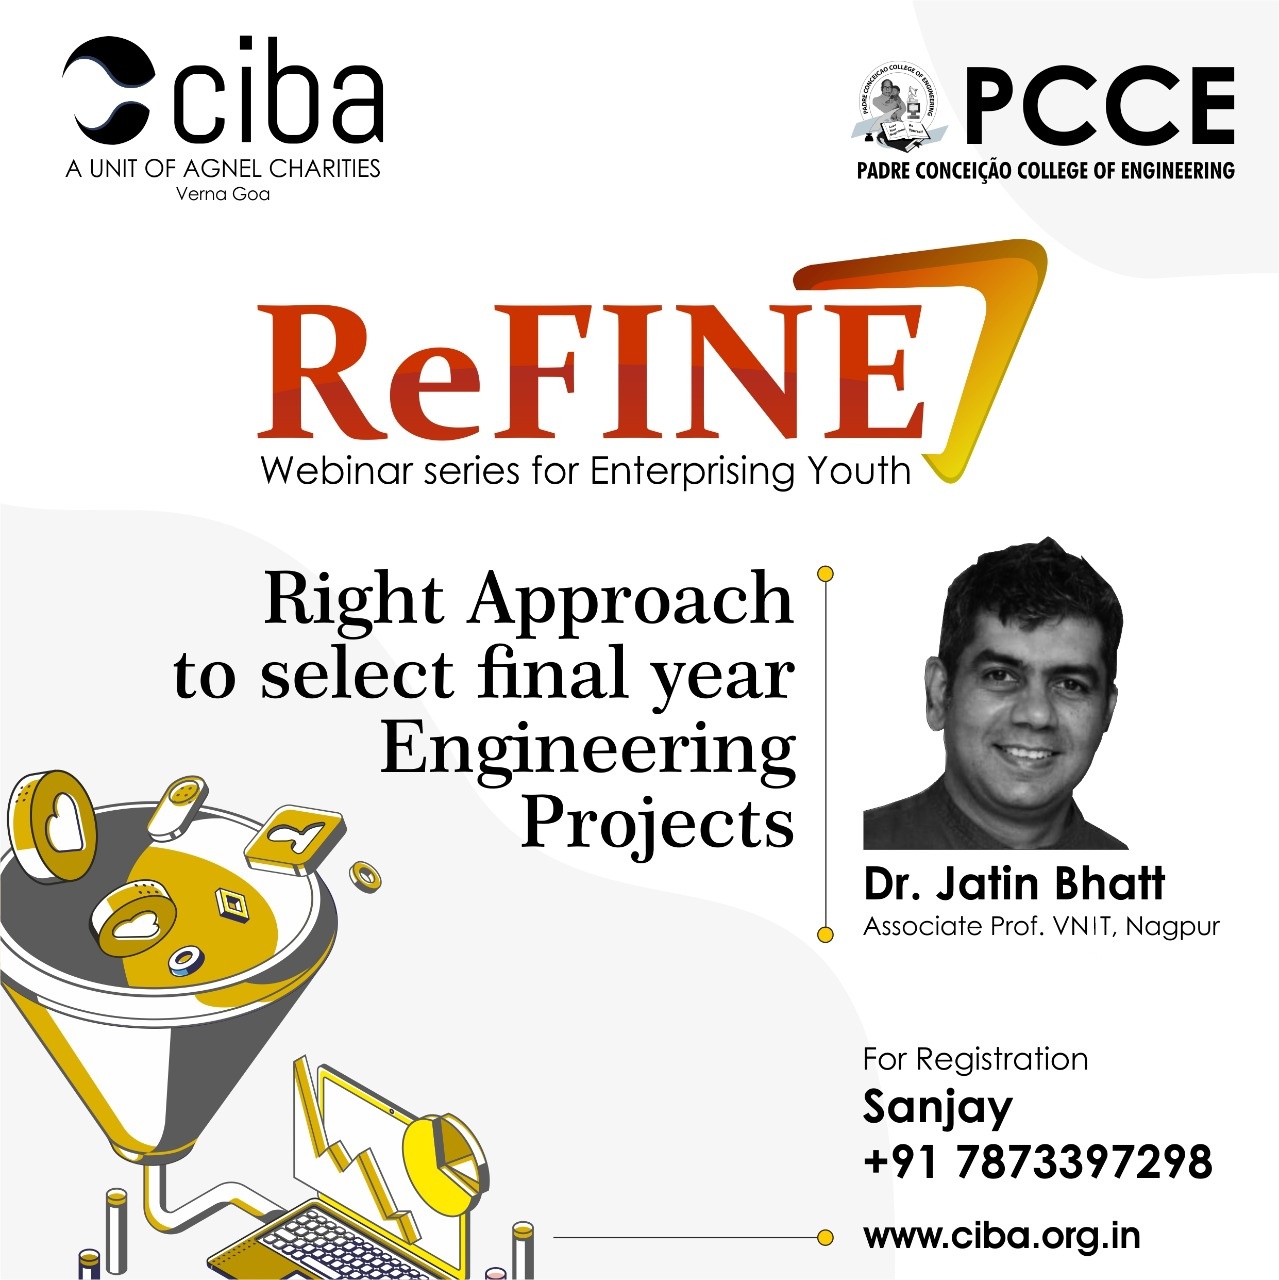 ciba-ReFINE - Right Approach to select the Final Year Engineering Project